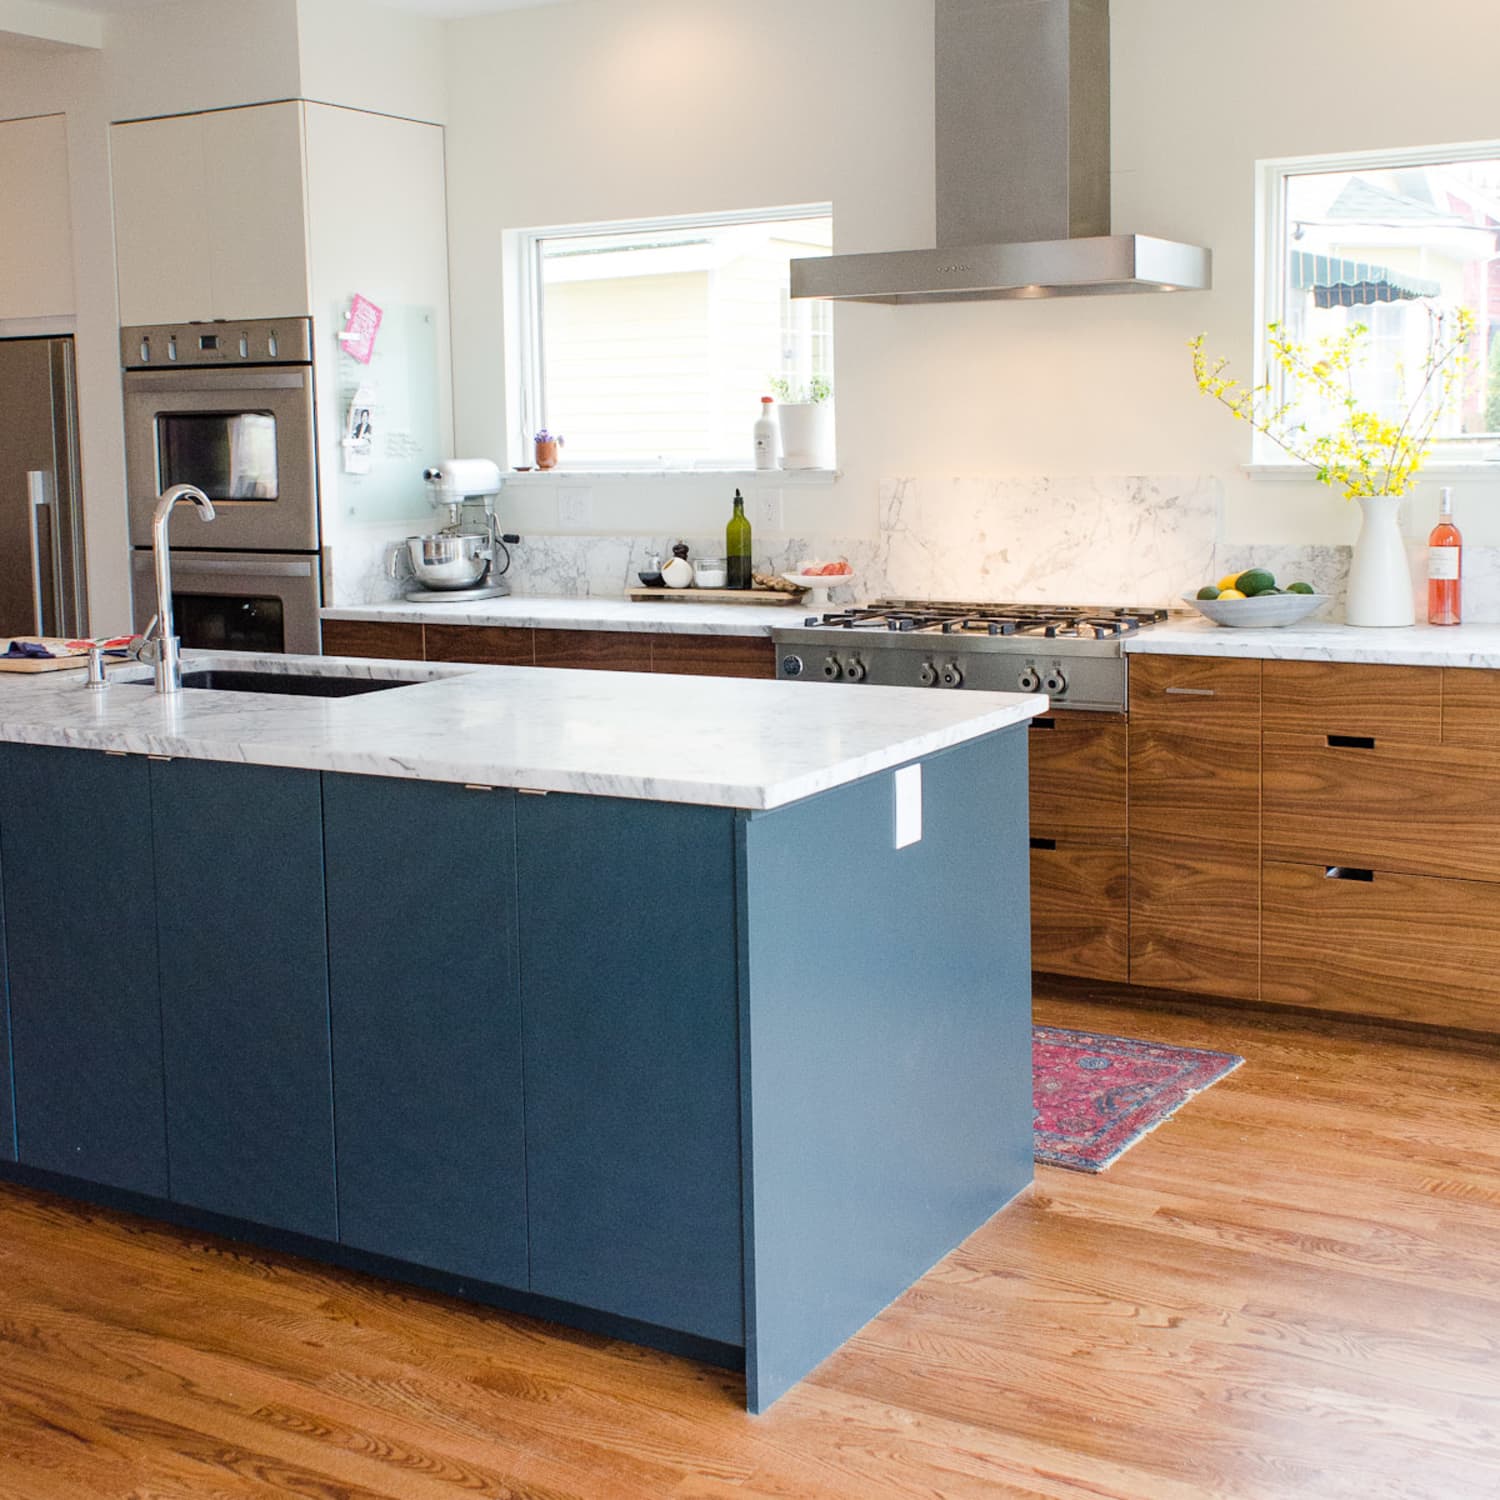 ikea kitchen review - remodel cost, cabinets quality | kitchn